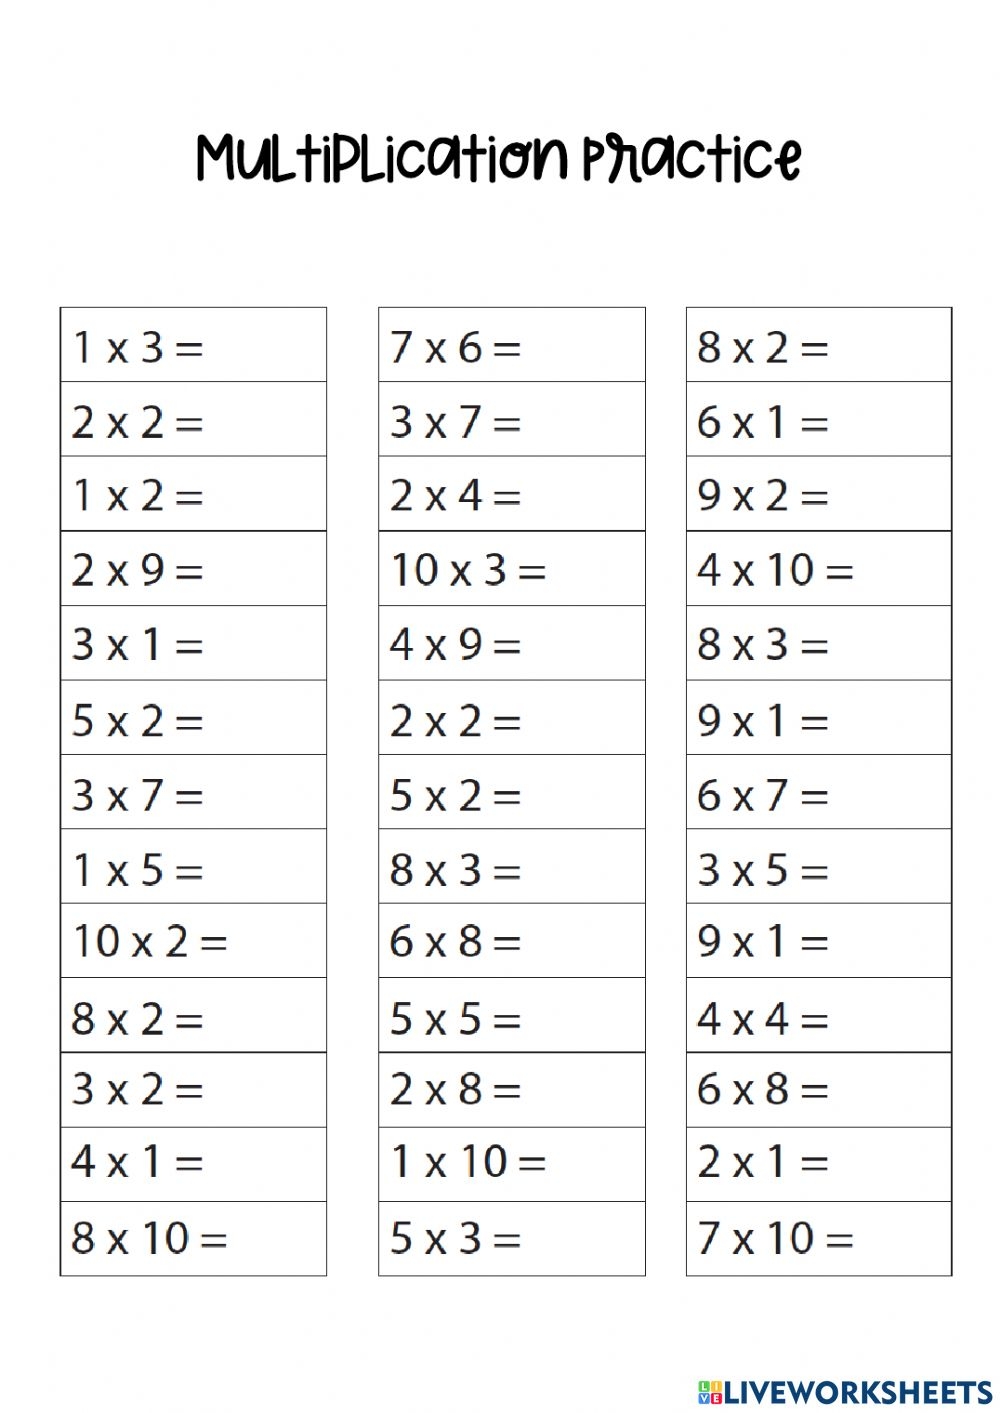 Multiplication Practice Activity For 3rd Grade